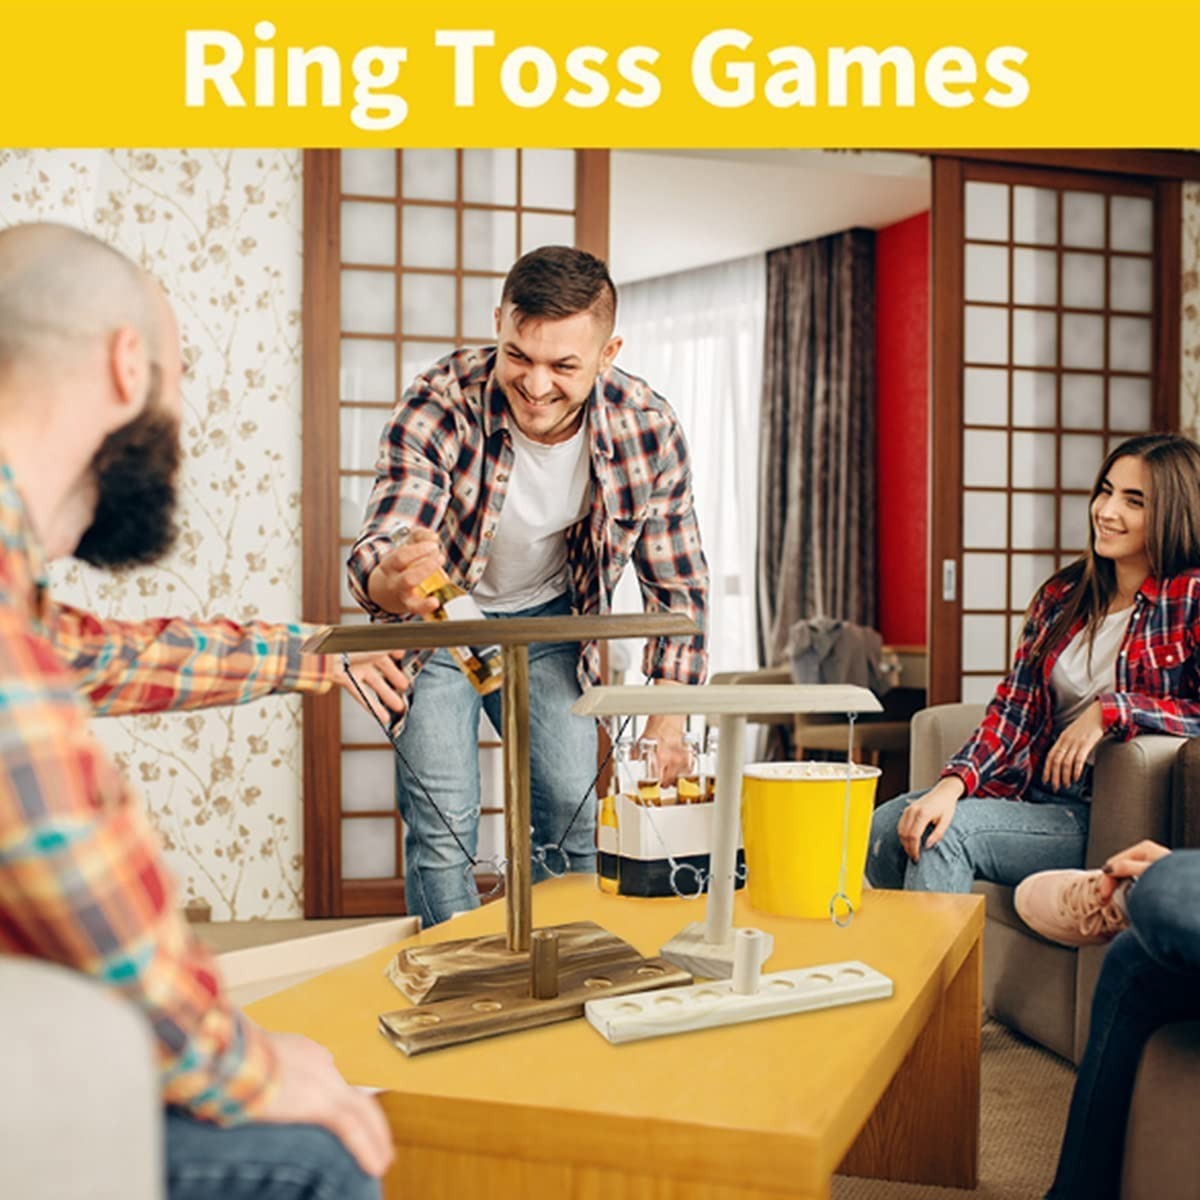 ⚡⚡Last Day Promotion 48% OFF - Ring Toss Games for Kids Adults Home Party Drinking Games